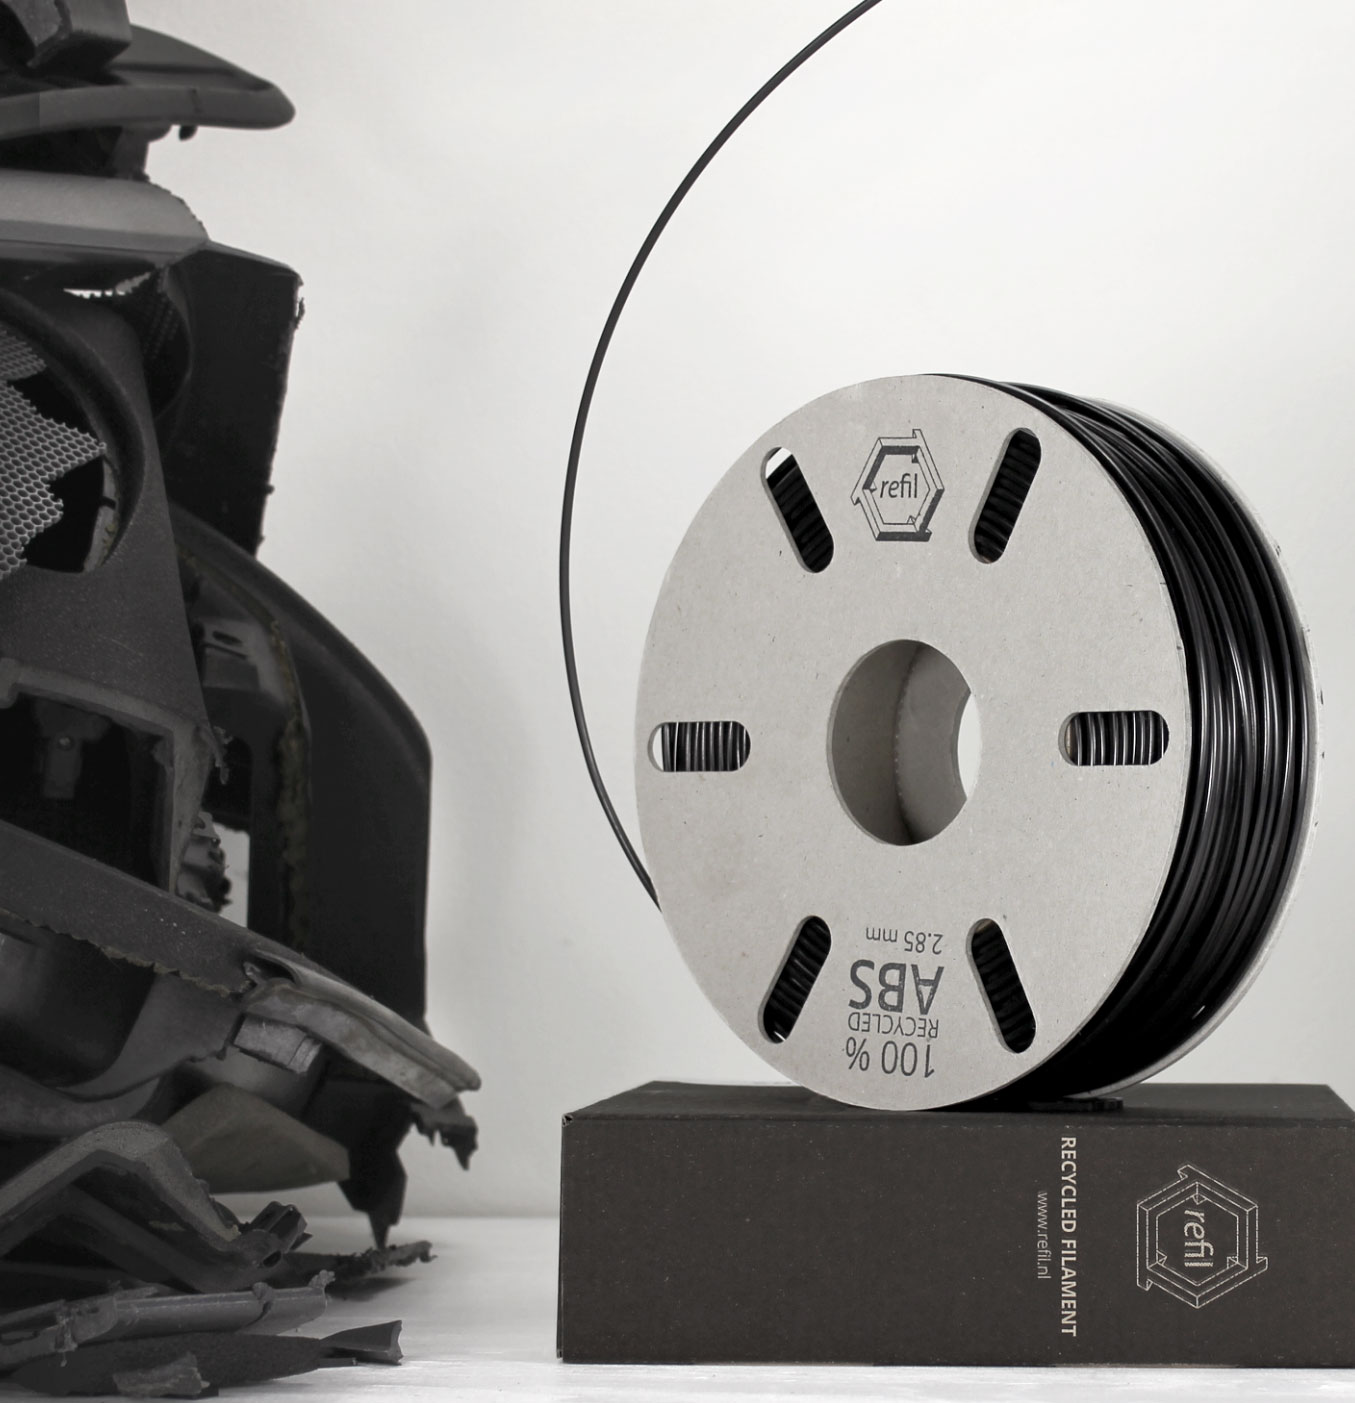 Refil – The world’s first recycled 3D printing filament